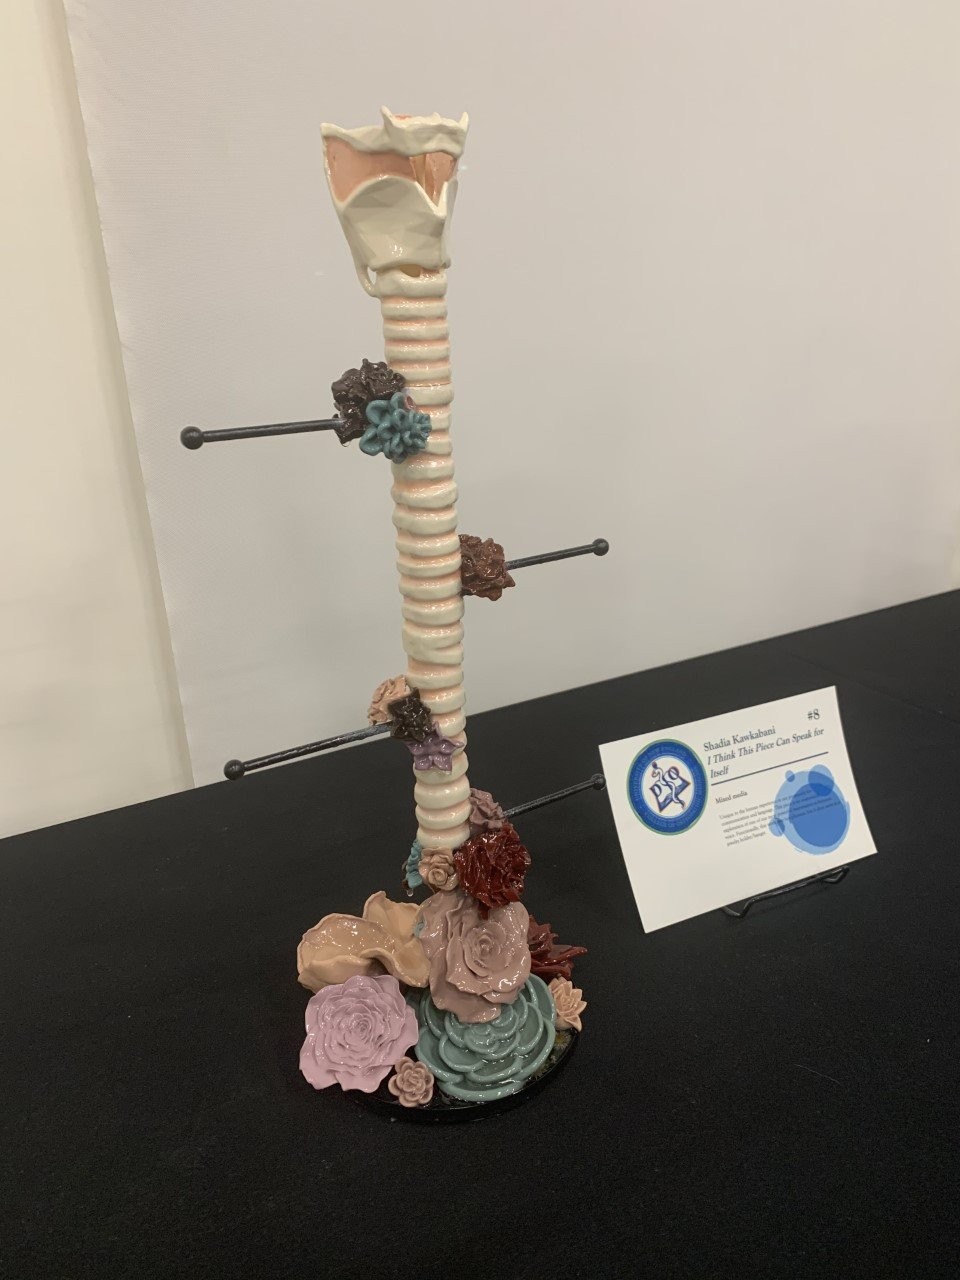 Image of a jewelry hanger designed to look like a trachea